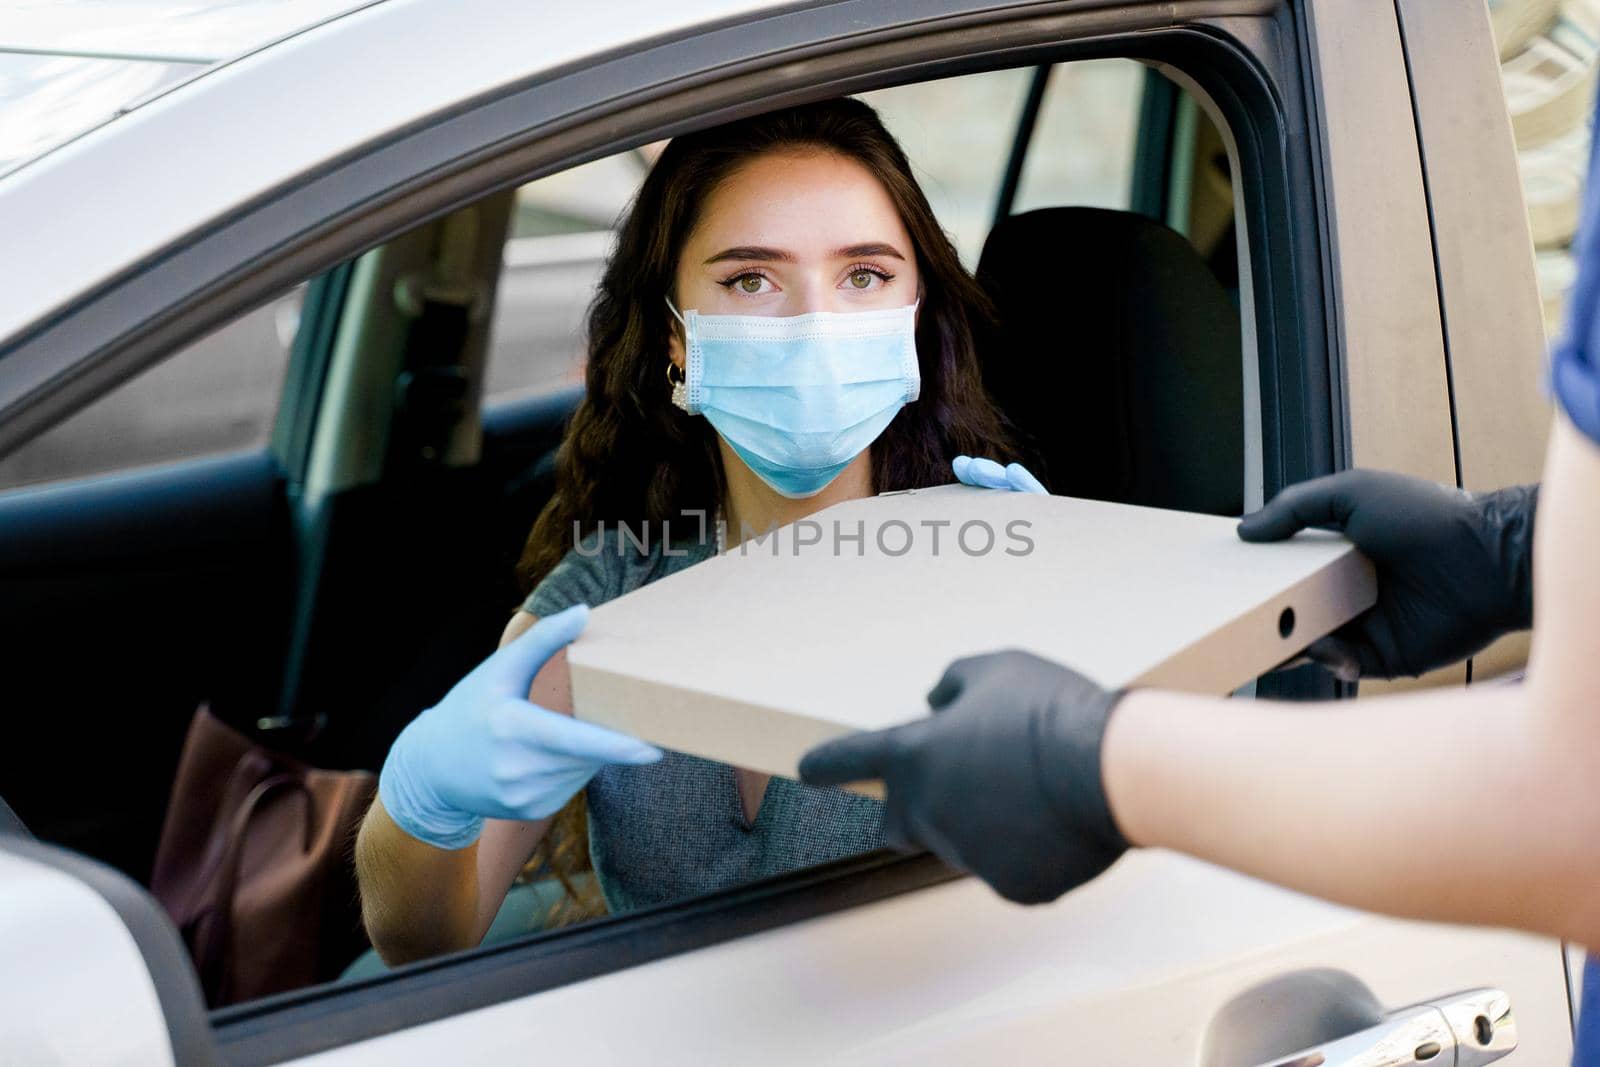 Safe food delivery from pizzeria to car during quarantine covid-19. Attractive young girl in blue medical mask and gloves gets pizza in cardboard box